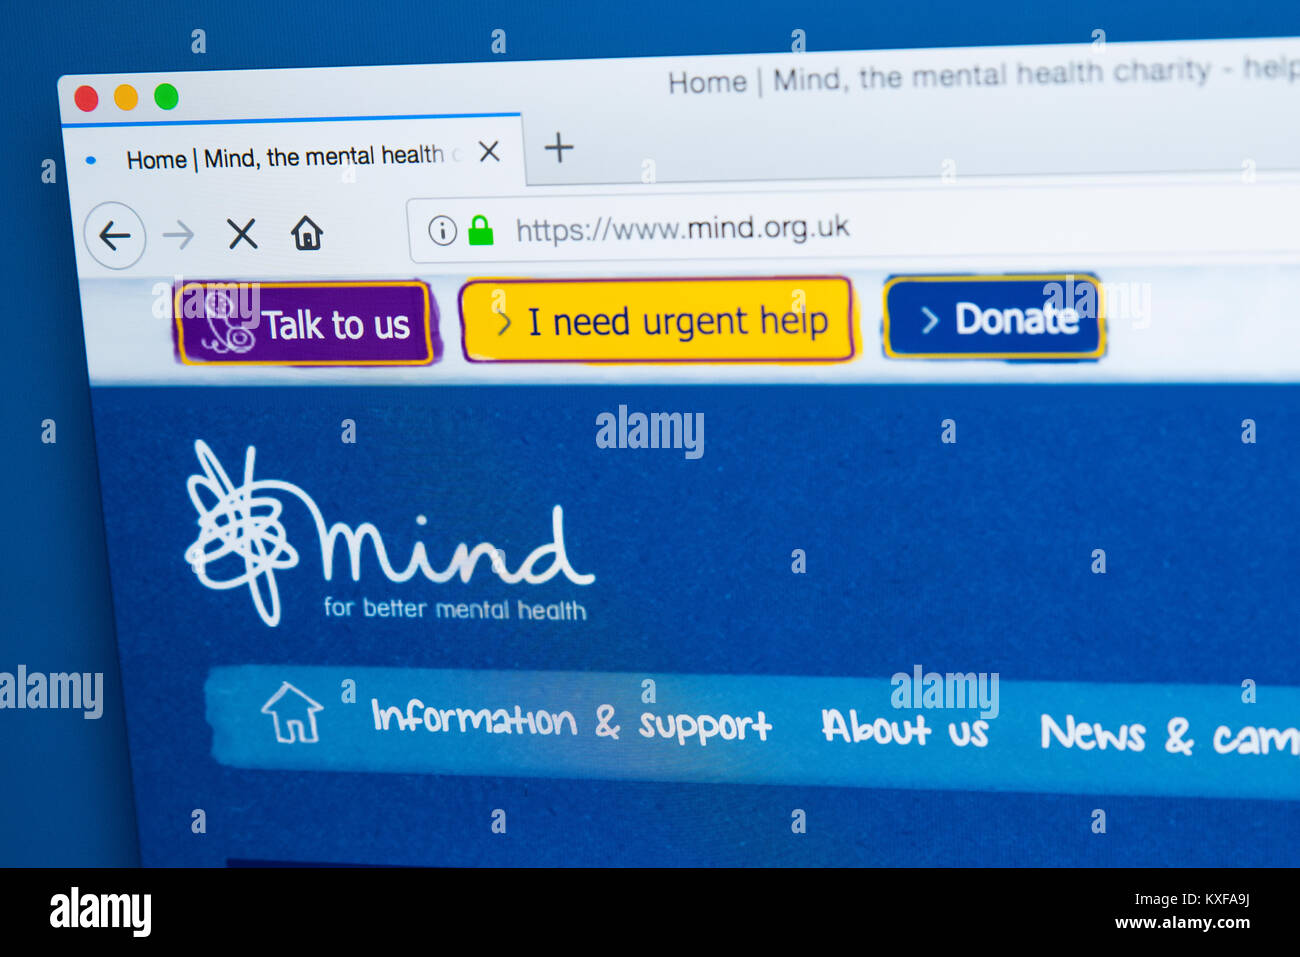 LONDON, UK - JANUARY 4TH 2018: The homepage of the official website for Mind - the mental health charity, on 4th January 2018. Stock Photo